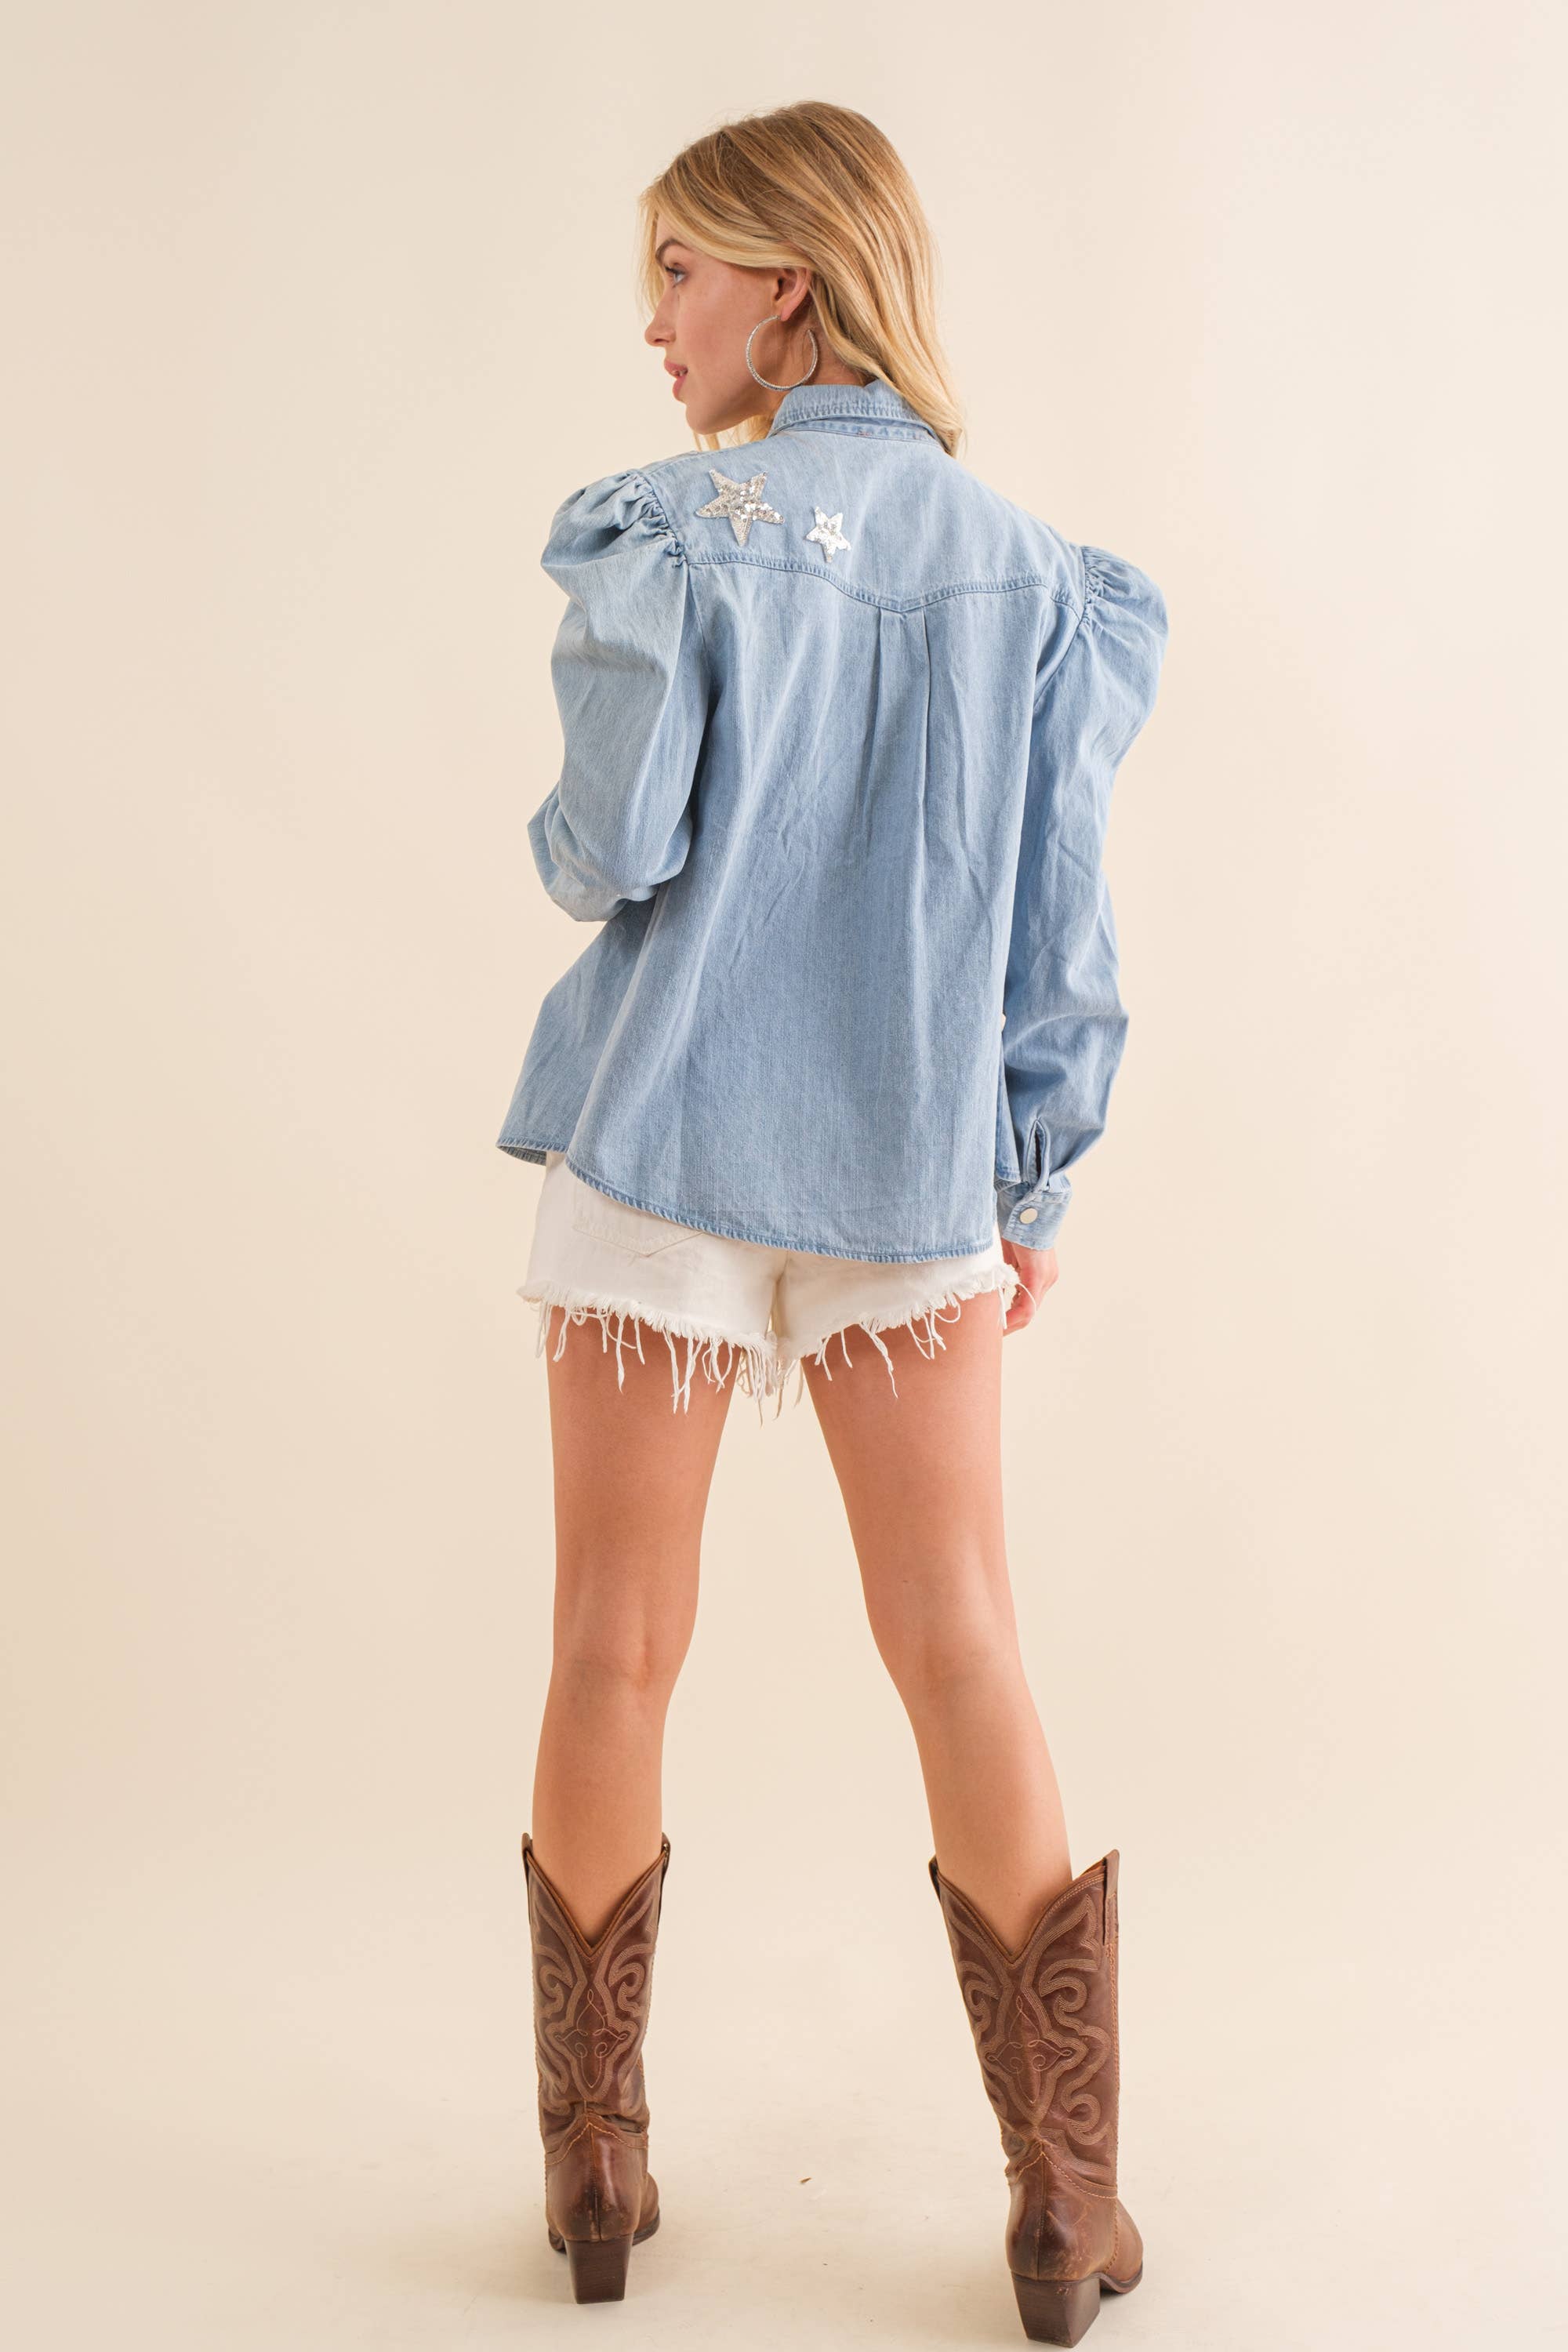 Sequin HOWDY Chambray Button Up with Puff Sleeves Shirt